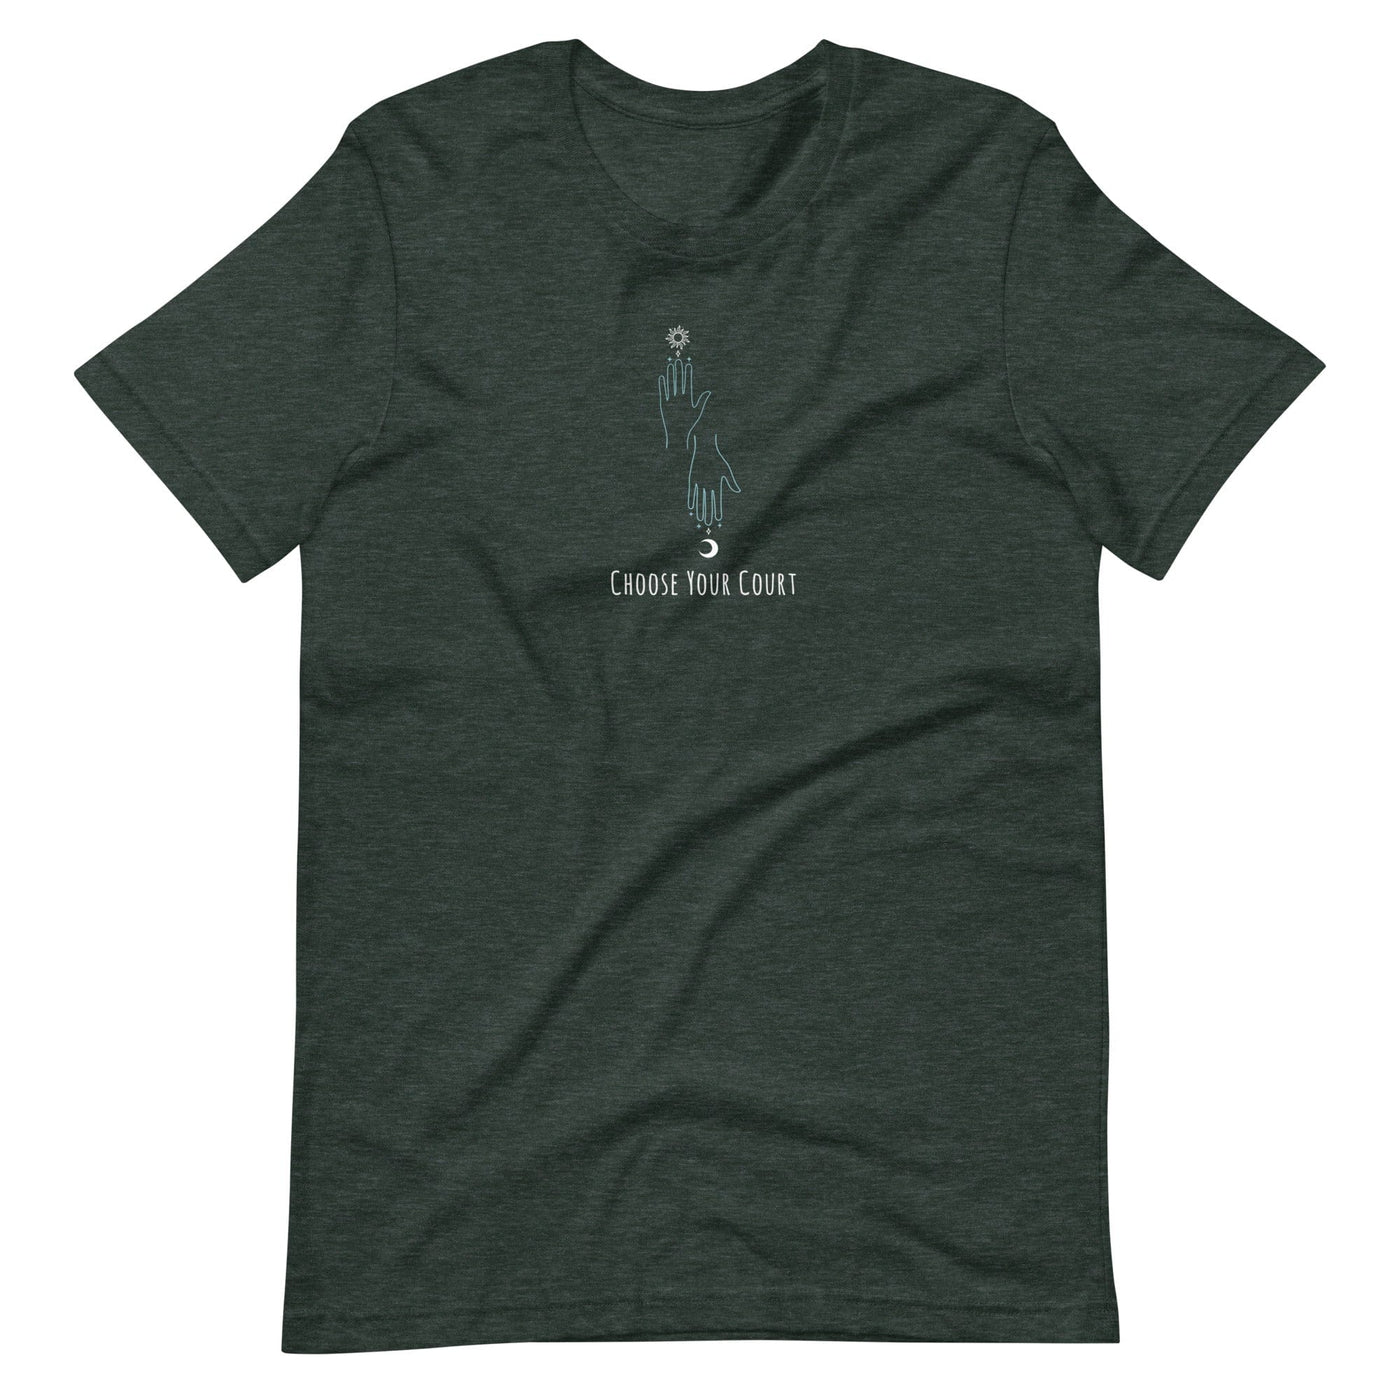 Lit Haven Booktique T-Shirt Heather Forest / S Choose Your Court tee